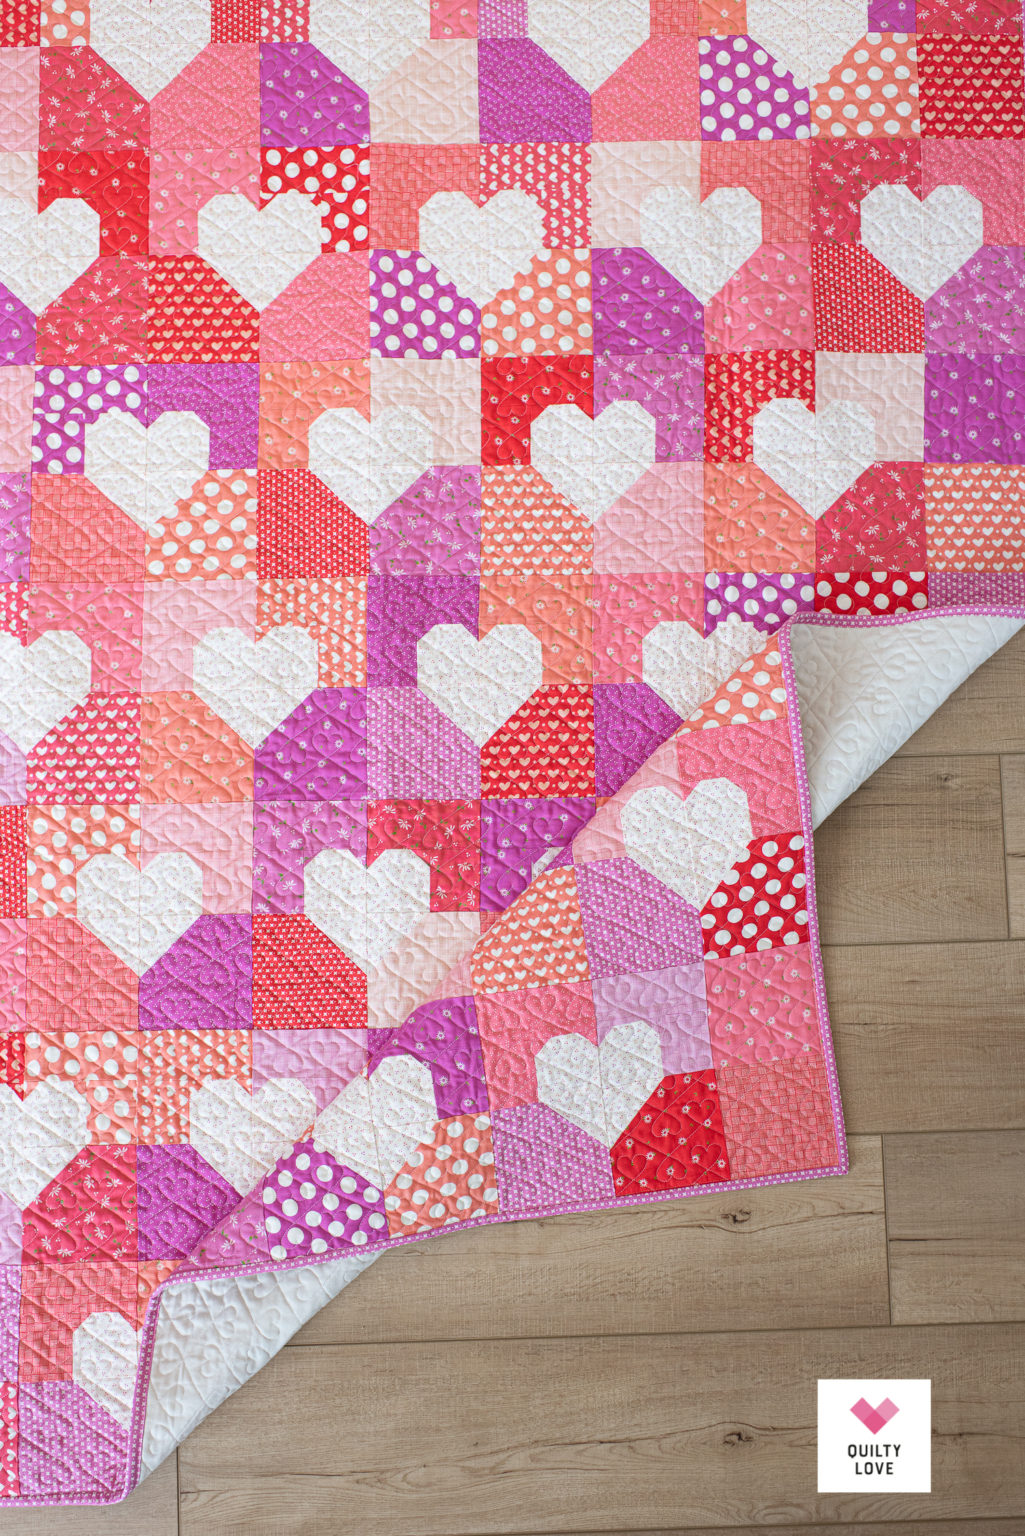 Patchwork Hearts Quilt Pattern - Scrappy heart quilt - Quilty Love